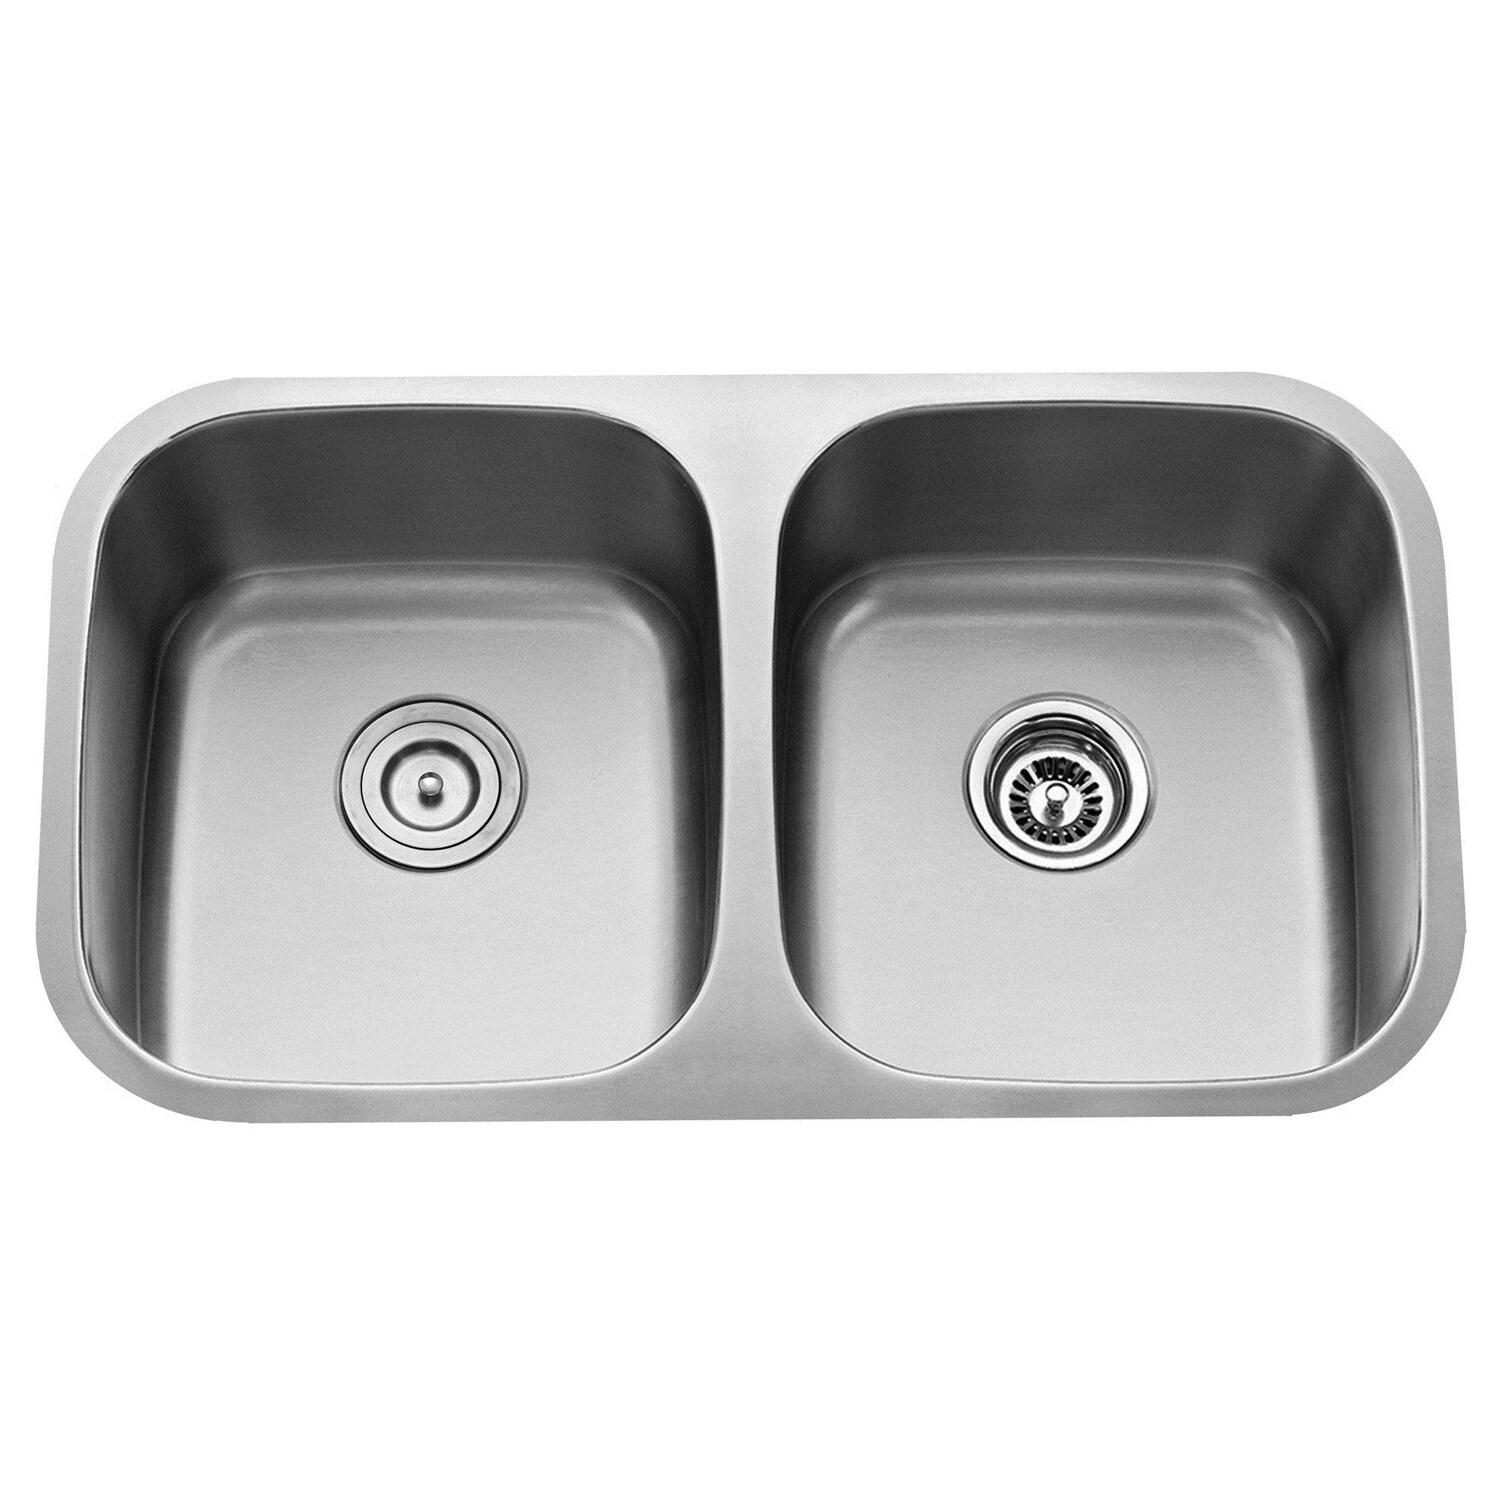 https://ak1.ostkcdn.com/images/products/4389953/Kraus-Kitchen-Combo-Set-Stainless-Steel-Undermount-Sink-with-Faucet-8d508bef-7b19-4c6b-b278-09b24aefea66.jpg